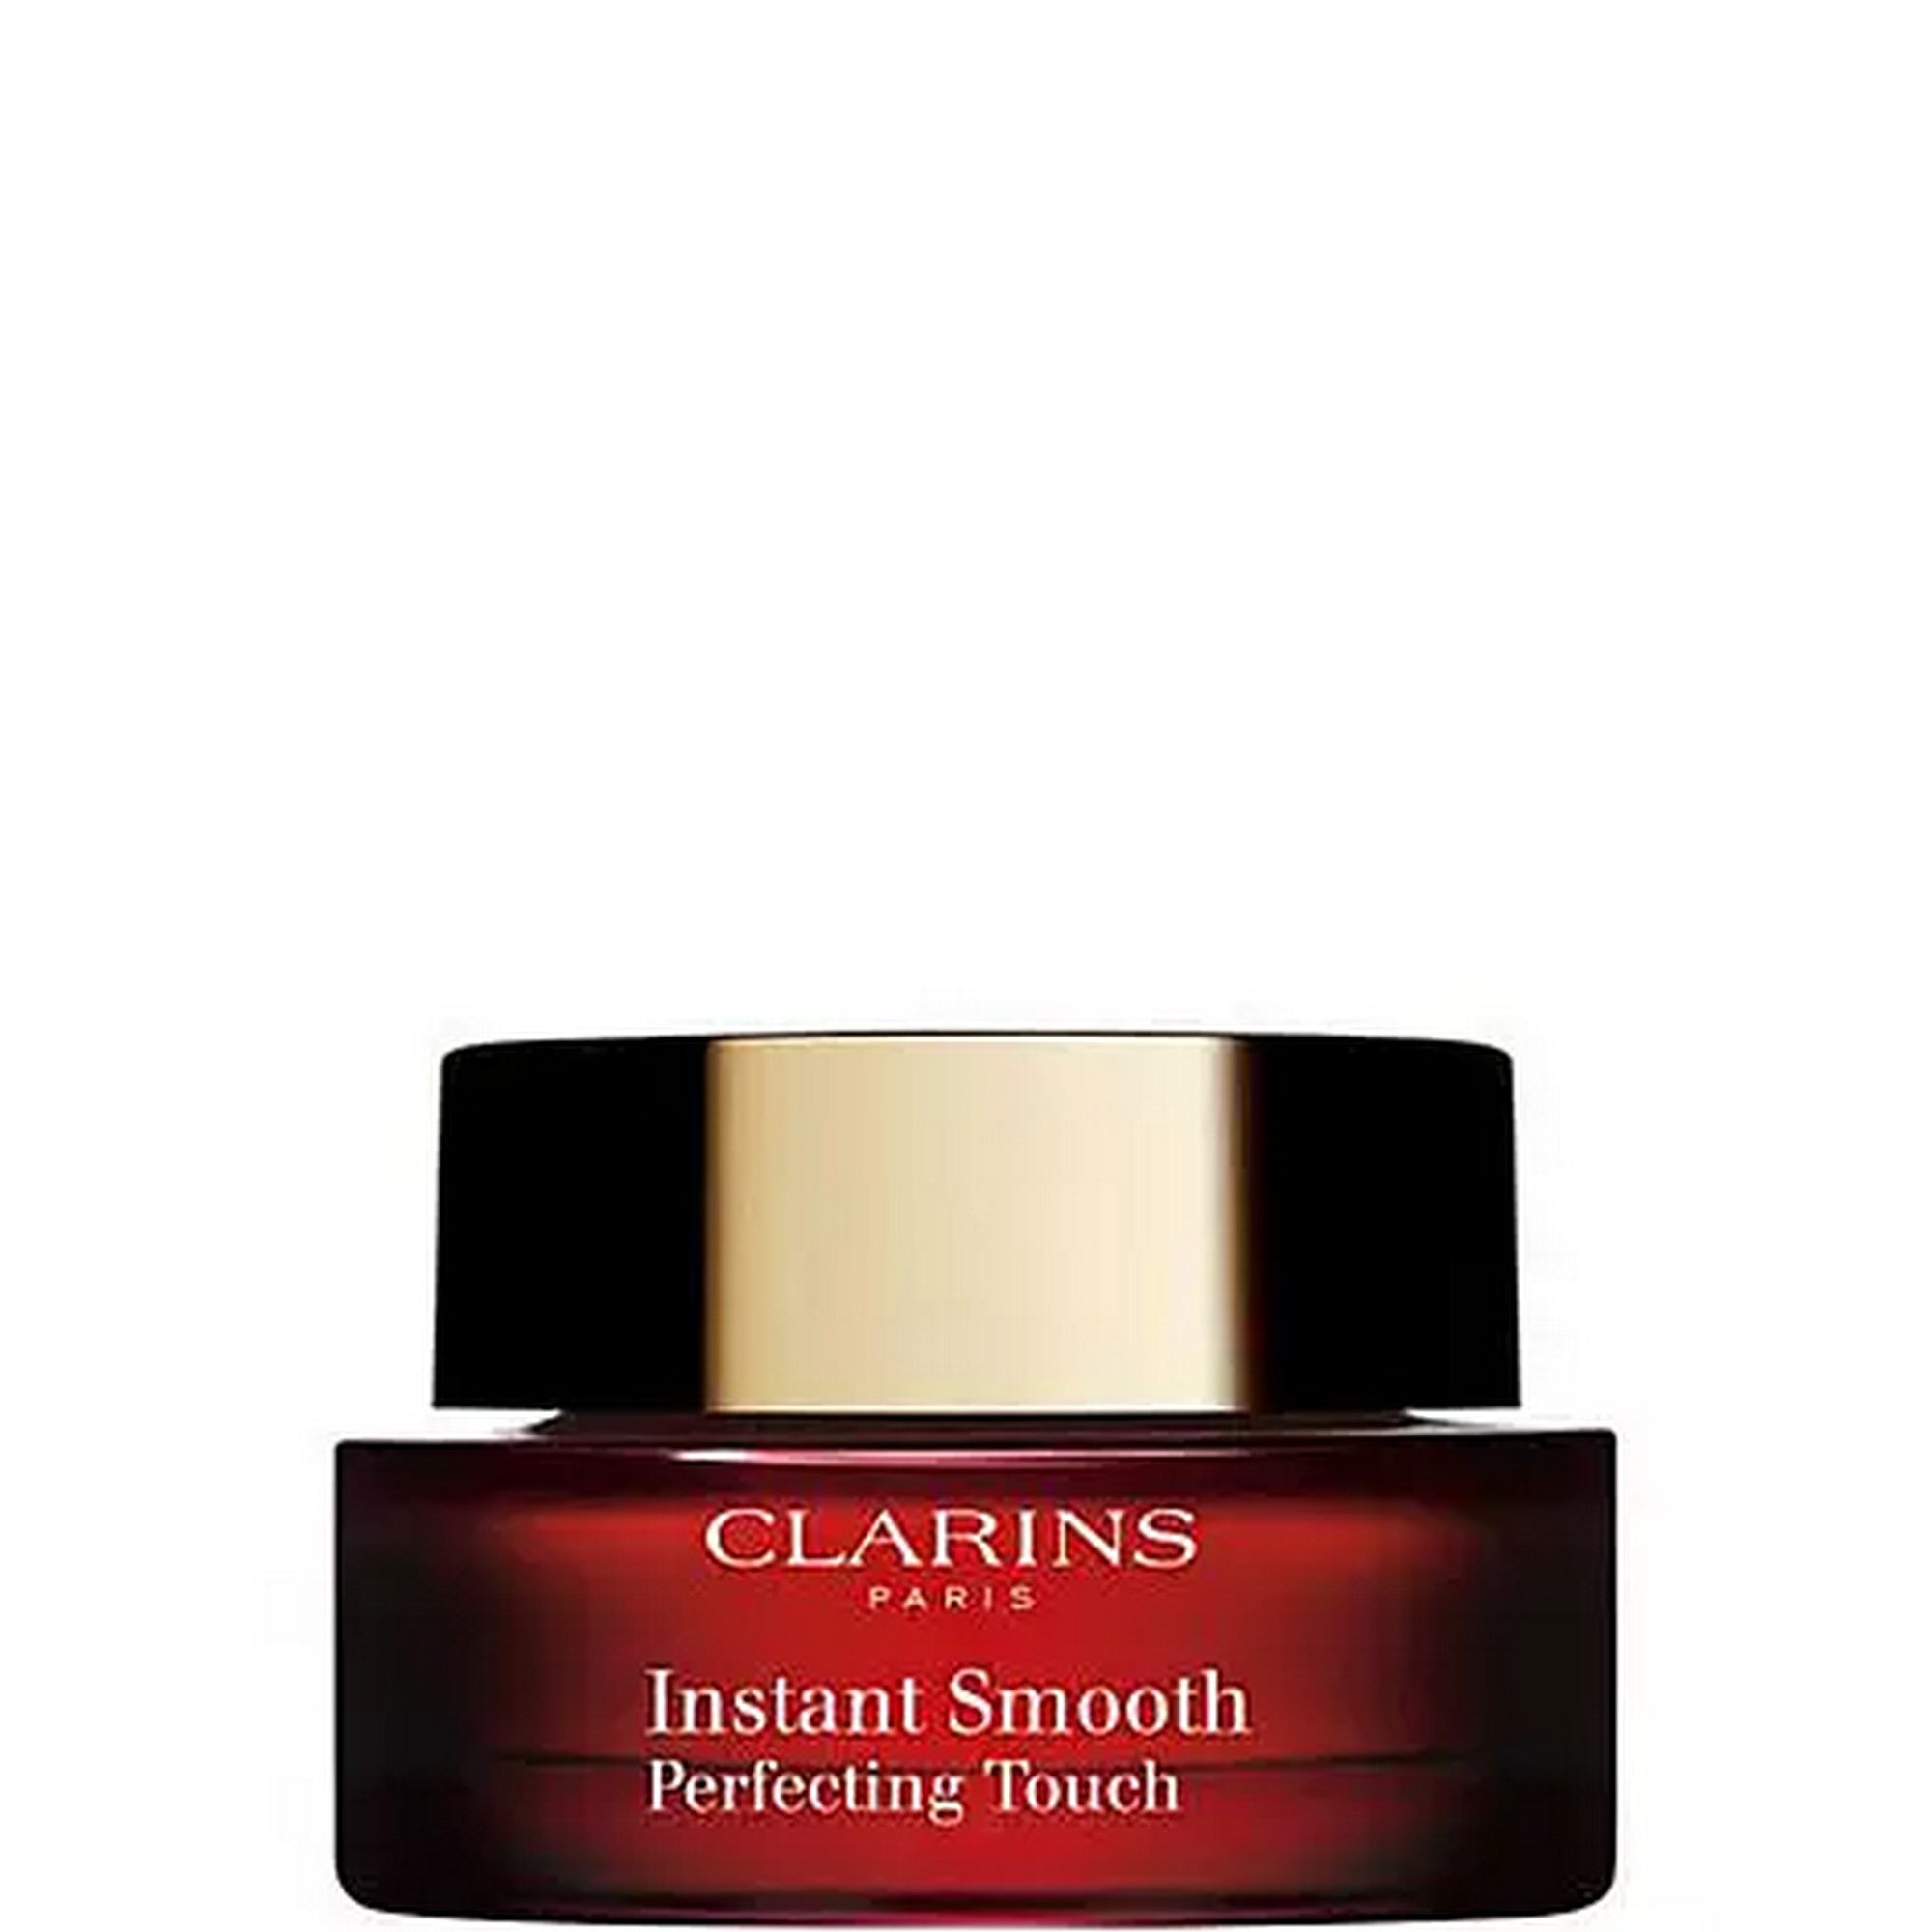 CLARINS INSTANT SMOOTH PERFECTING TOUCH 15ML